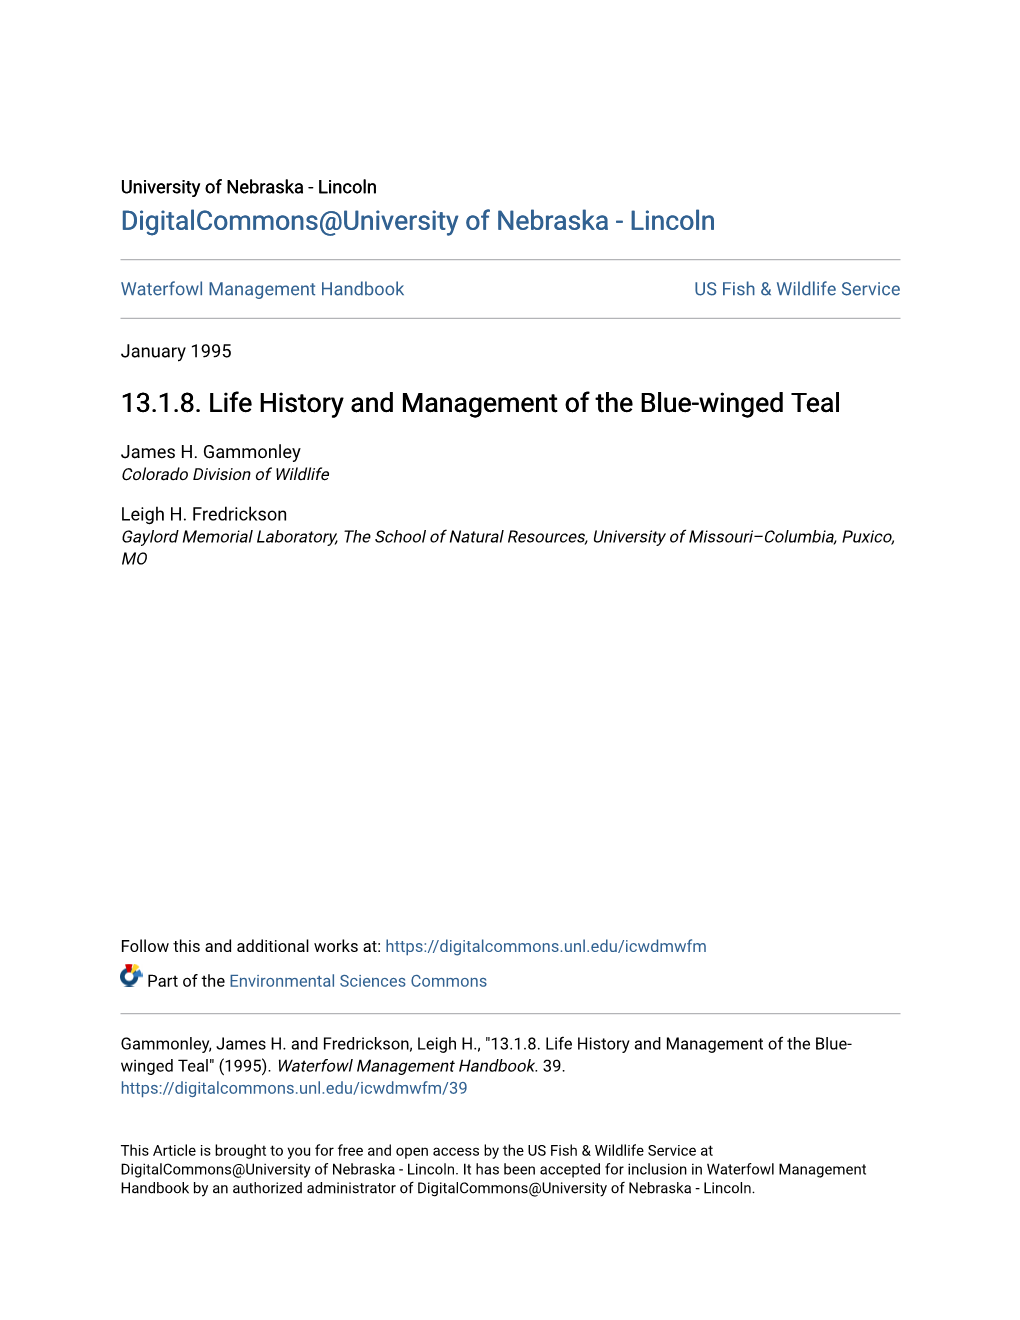 13.1.8. Life History and Management of the Blue-Winged Teal